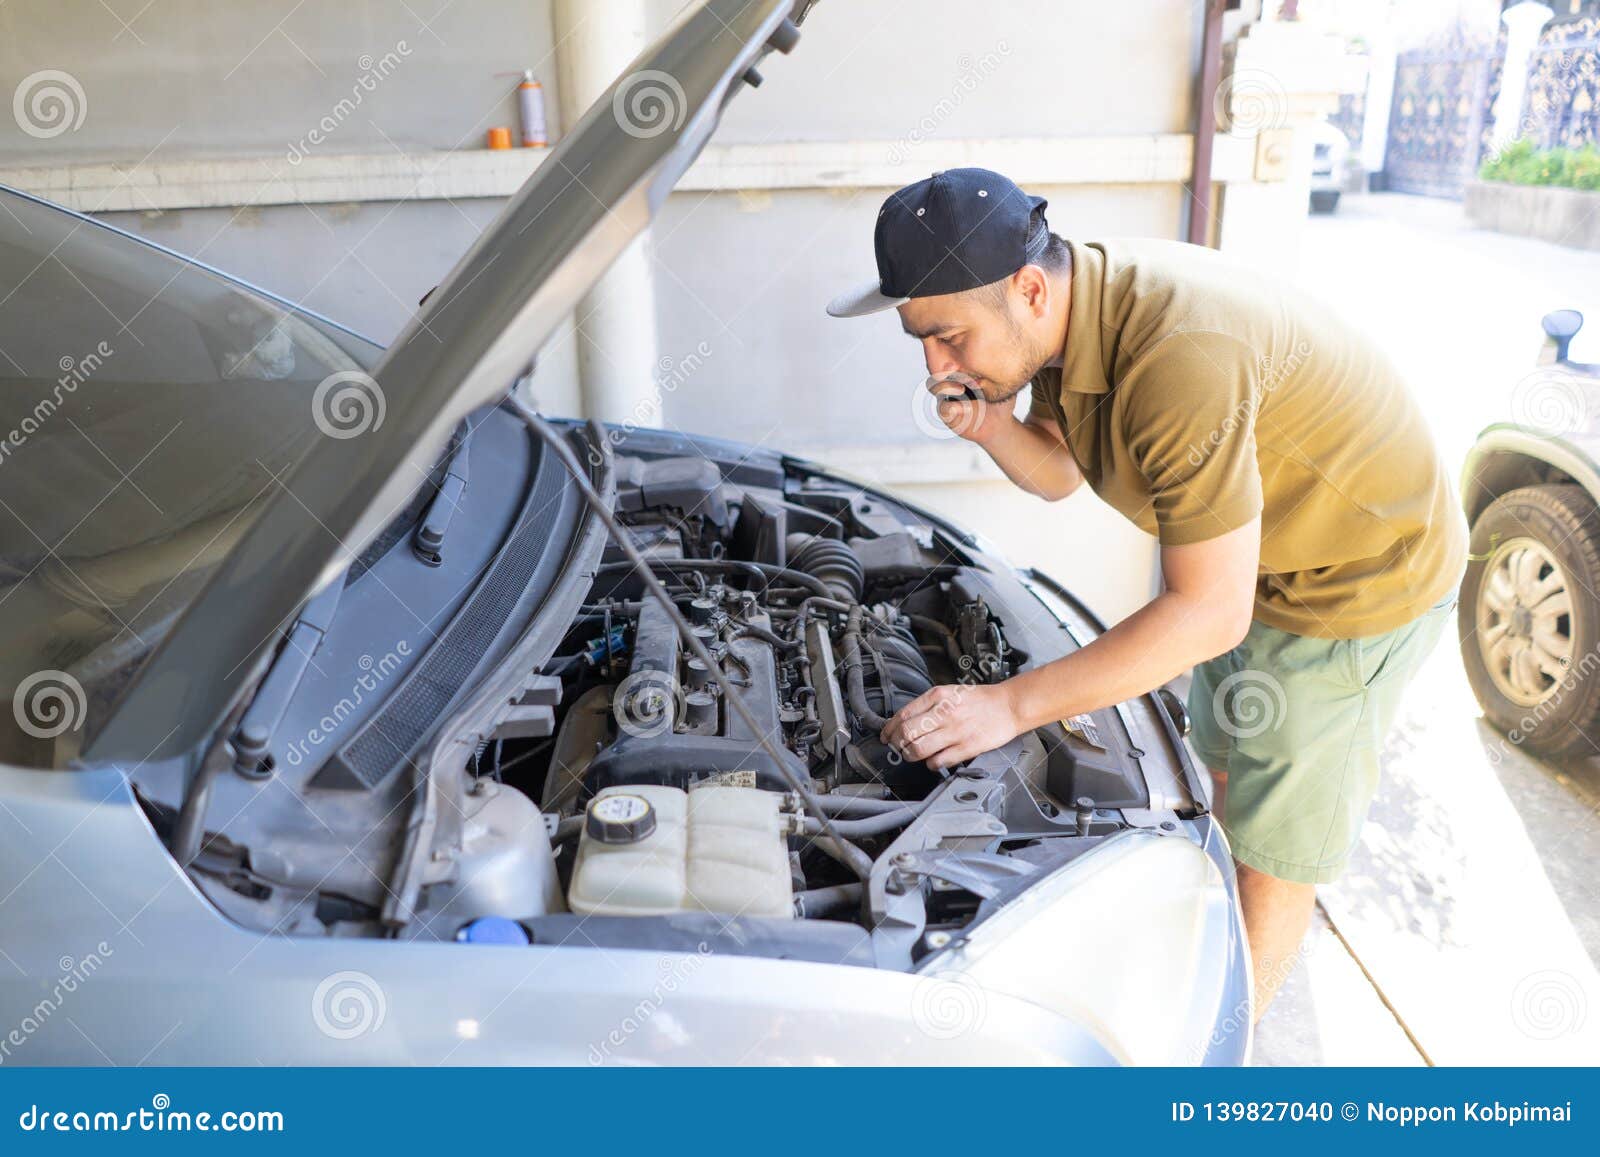 Mechanical Fixing Car At Home. Repairing Service Advice By Mobile Phone